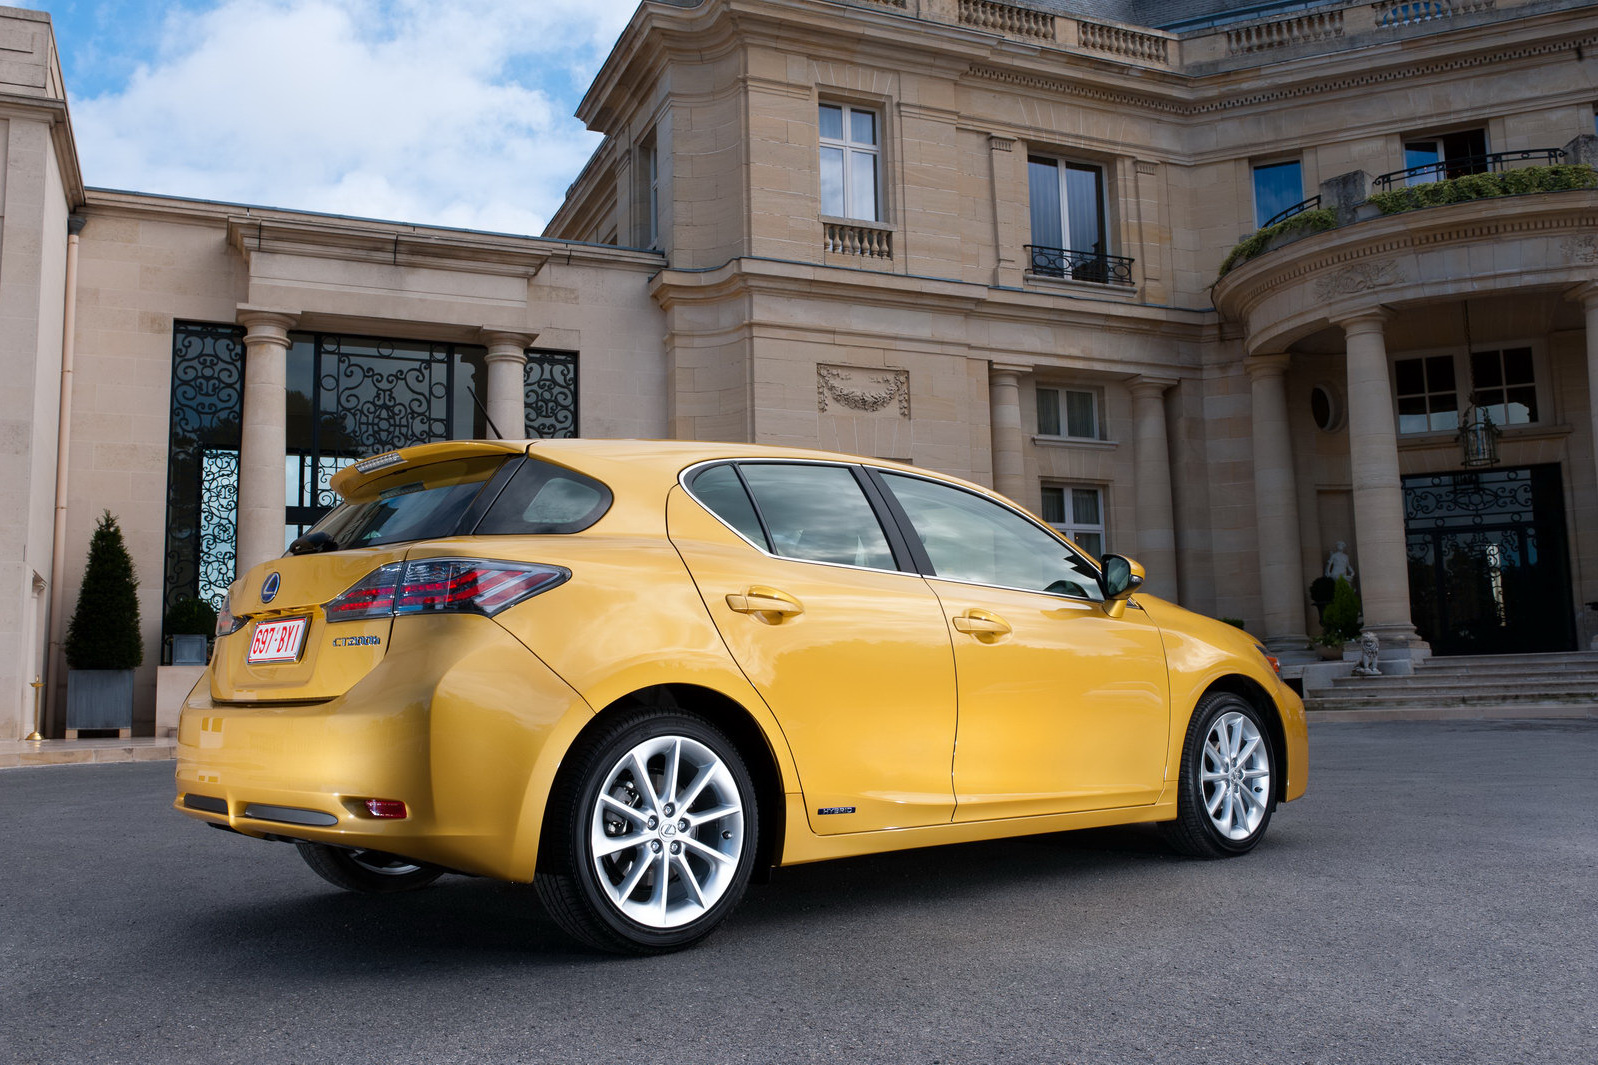 New Lexus CT200h Hybrid Priced from 29,995 in the U.S